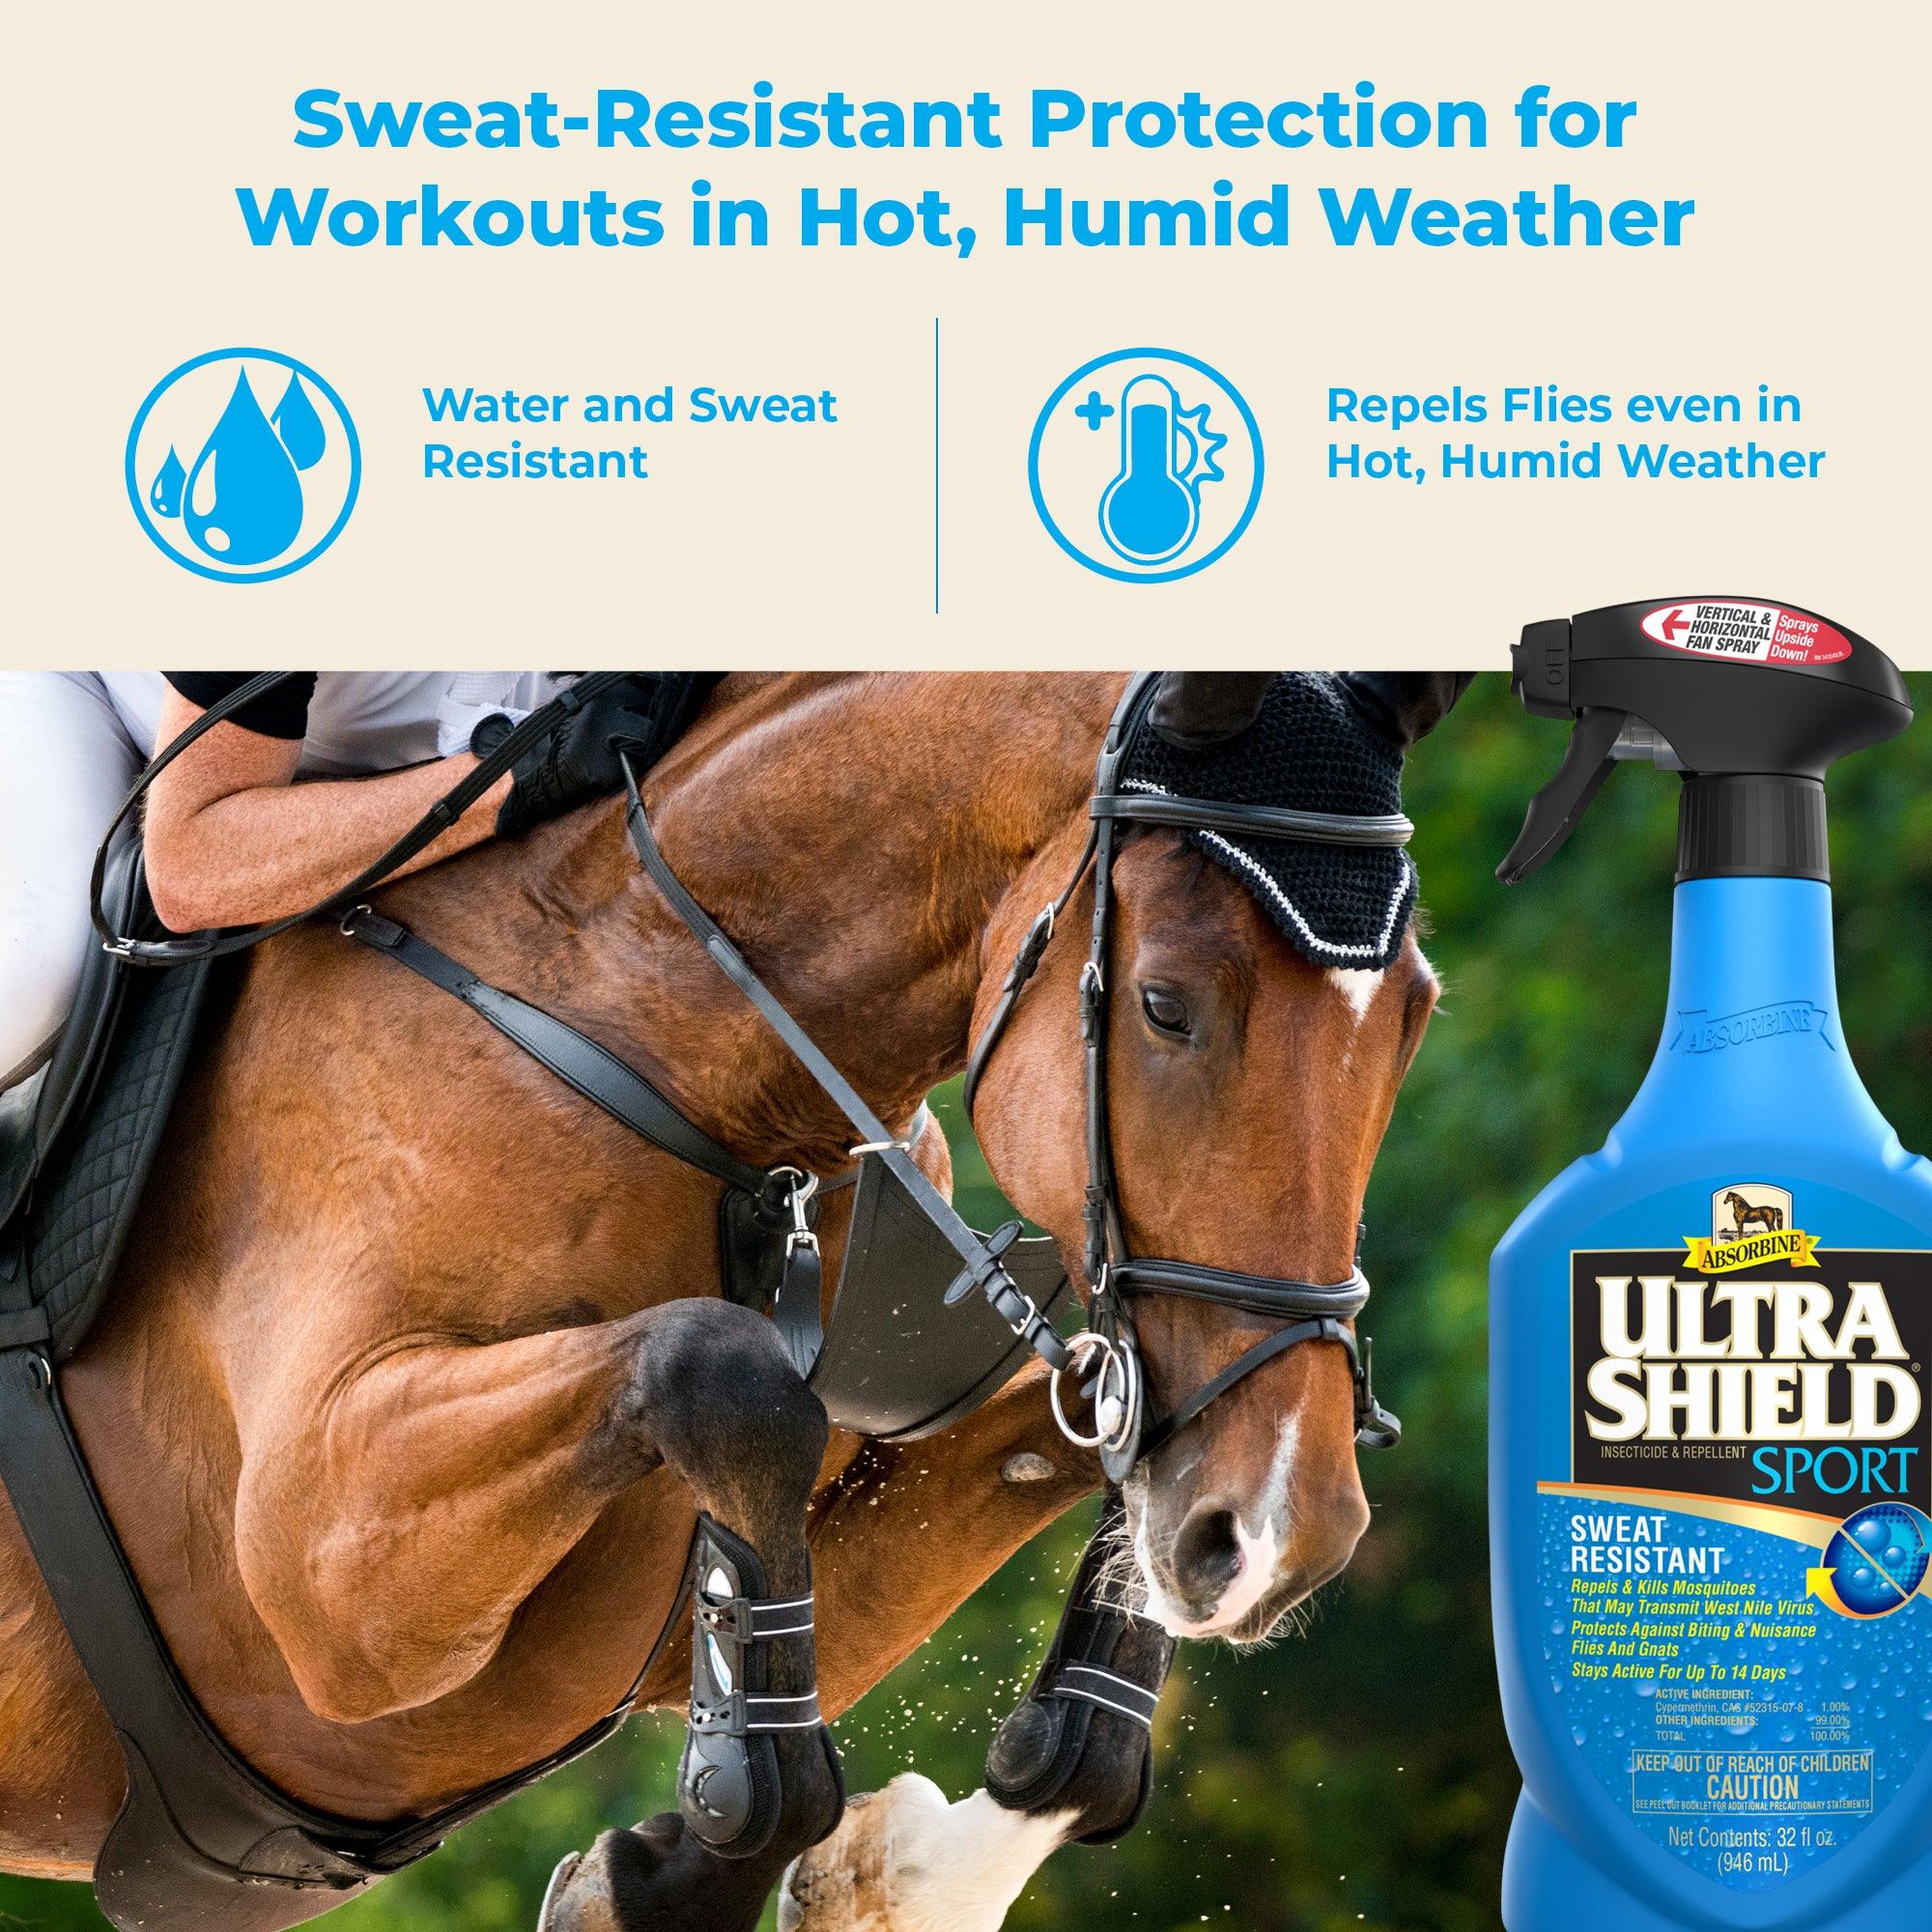 Chestnut colored horse in jumping gear, jumping towards a bottle of UltraShield Sport 32 oz bottle.  UltraShield Blue Sweat-Resistant Protection for workouts in hot, humid weather.  Water and sweat resistant, repels flies even in hot, humid weather.